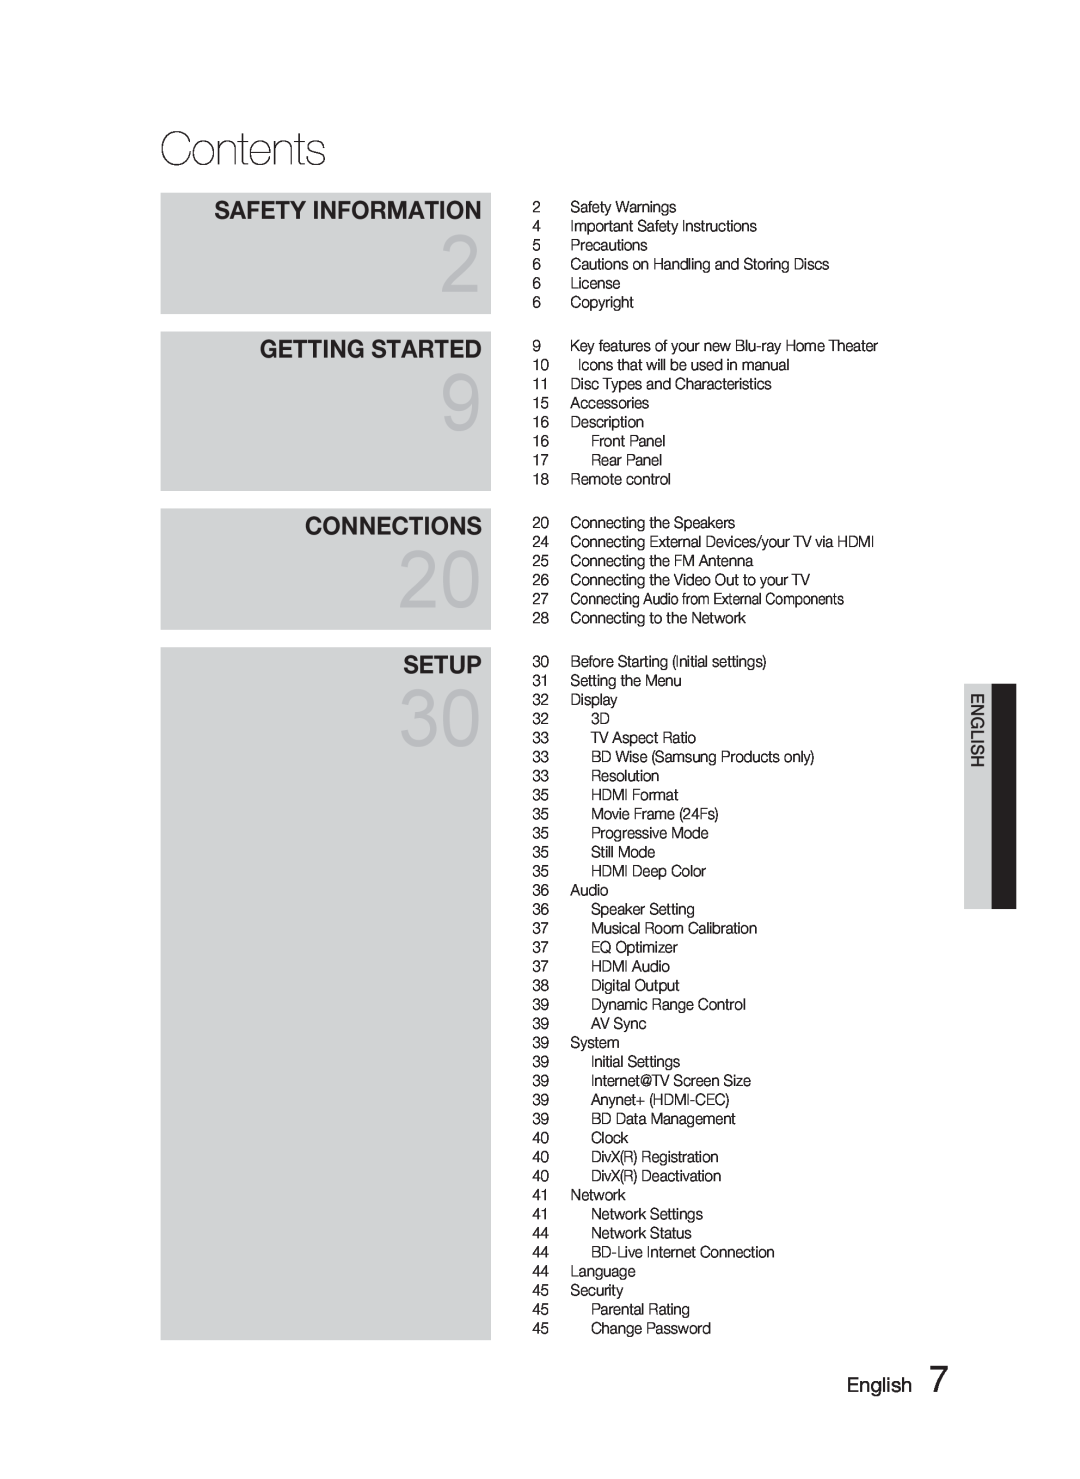 Samsung HT-C6900W user manual Contents, Getting Started, Connections, Setup, Safety Information, English 